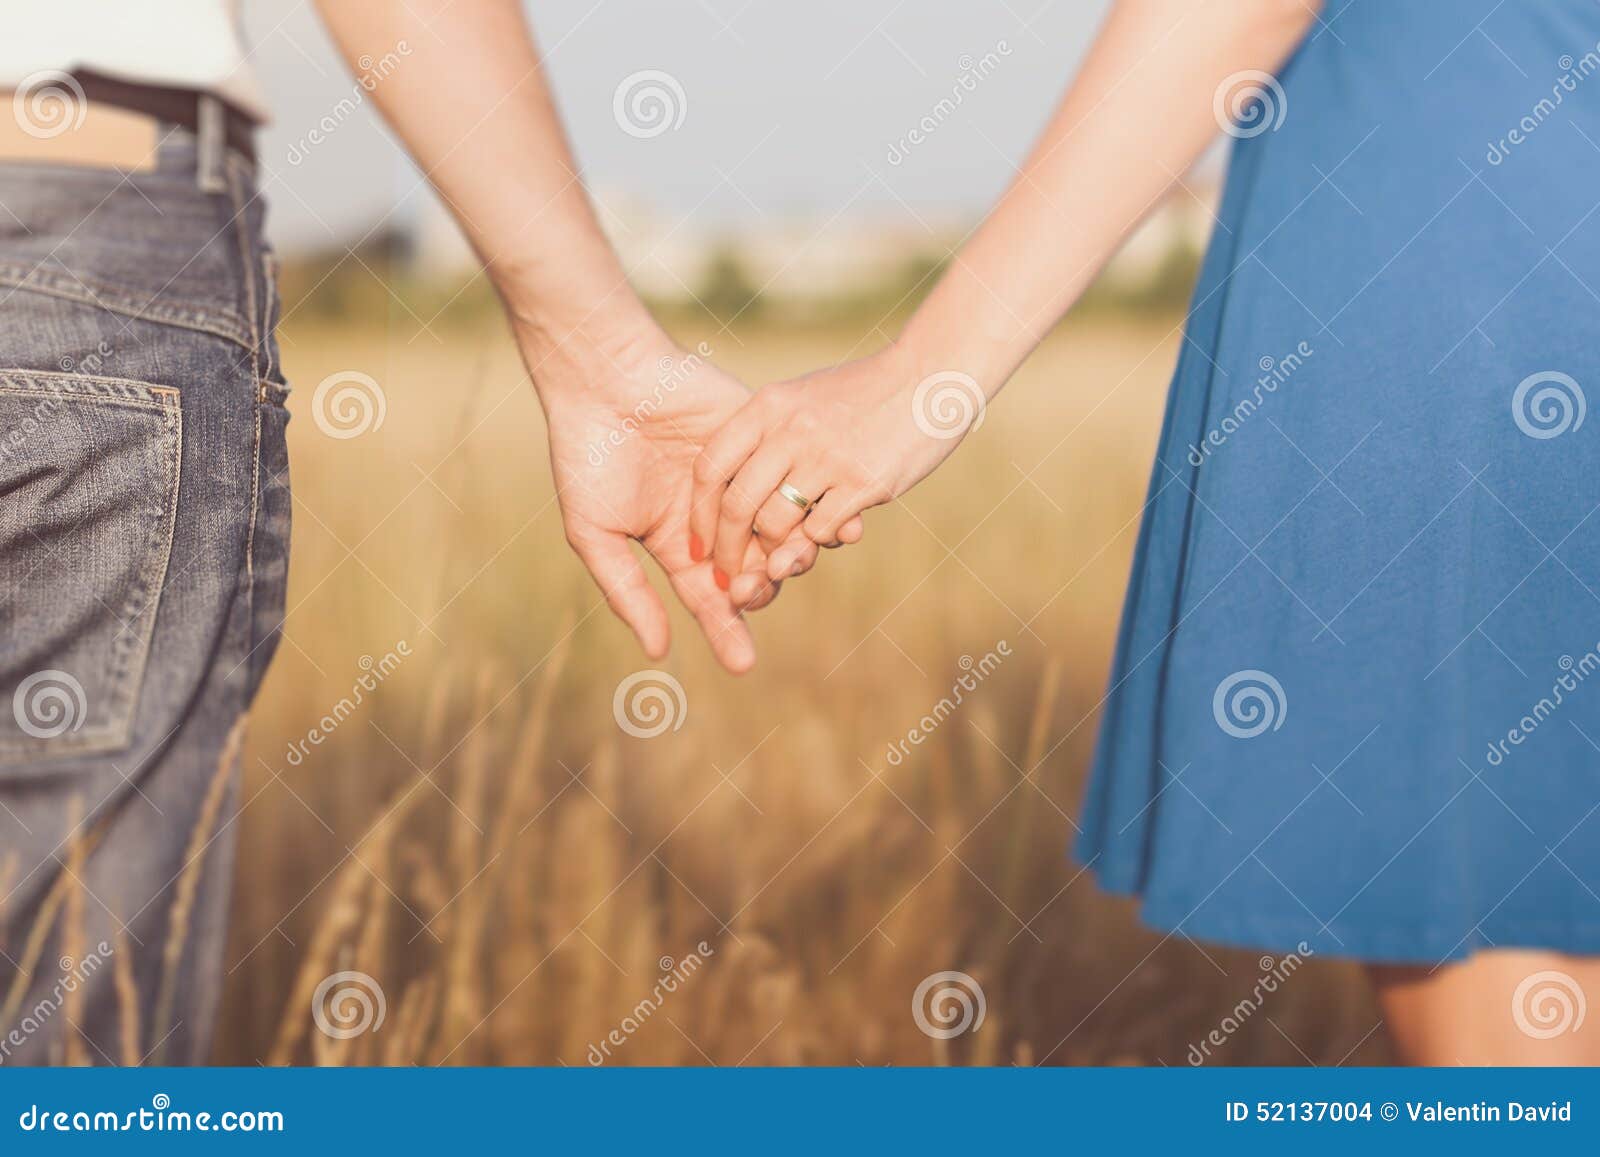 married couple holding hands at sunset